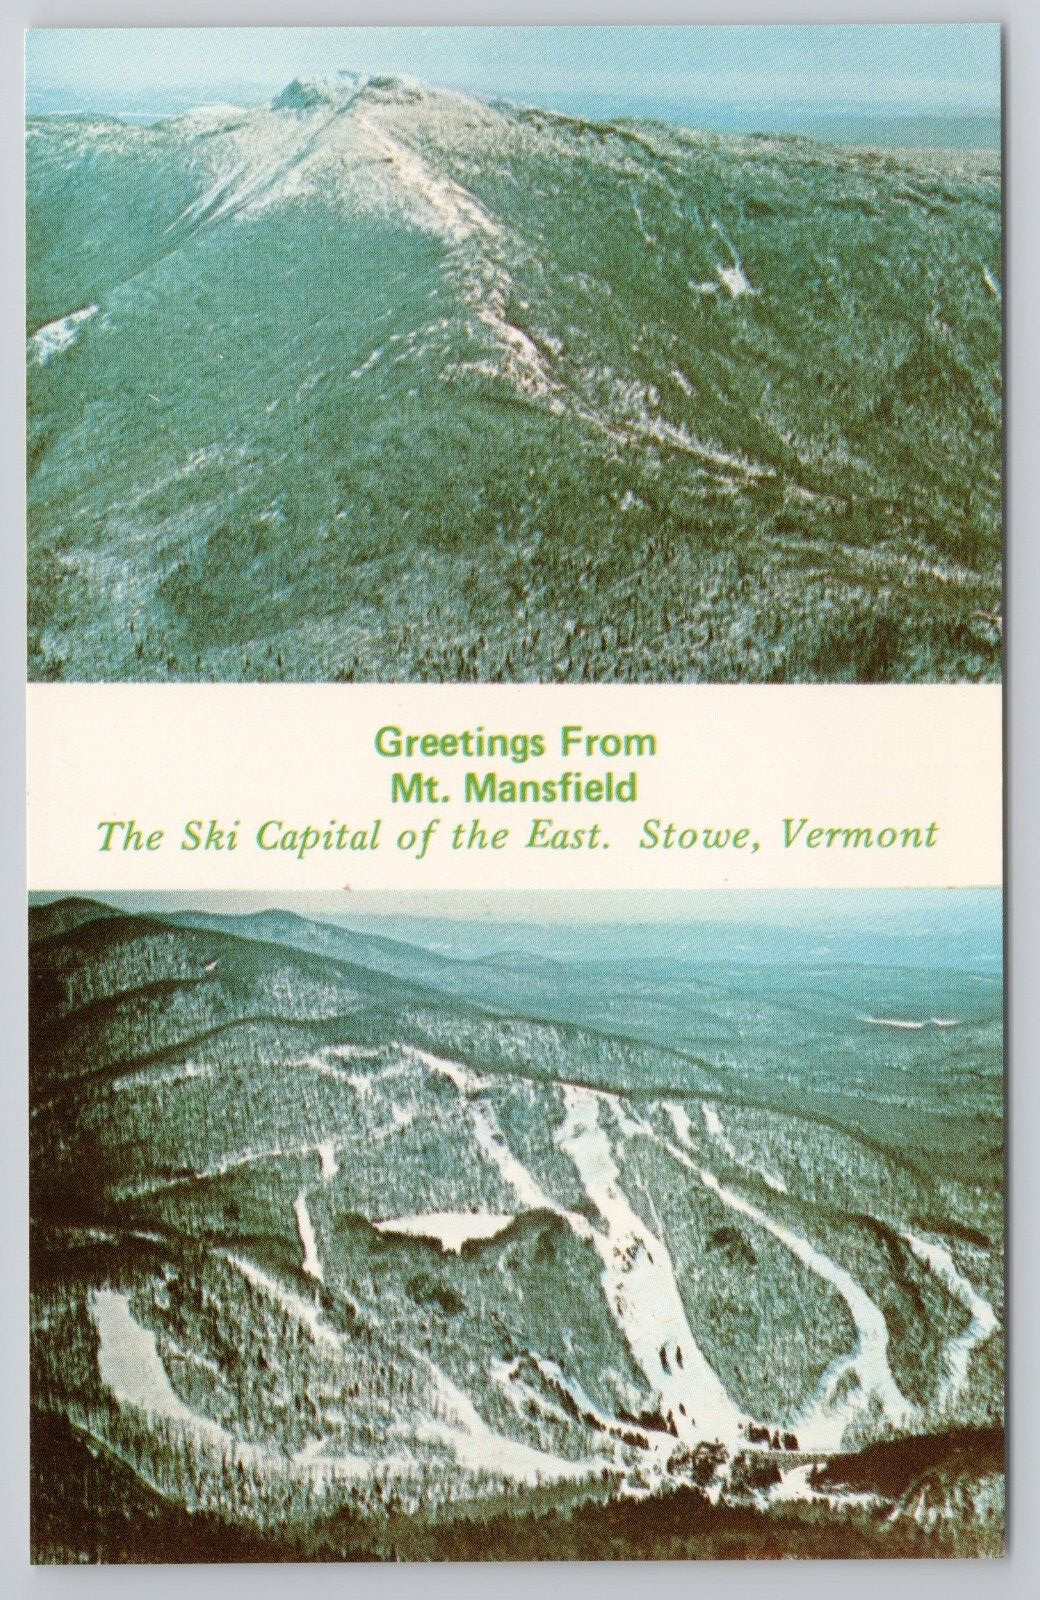 Greetings From Mt Mansfield Stowe Vermont 1970s Dual View Postcard Skiing Aerial